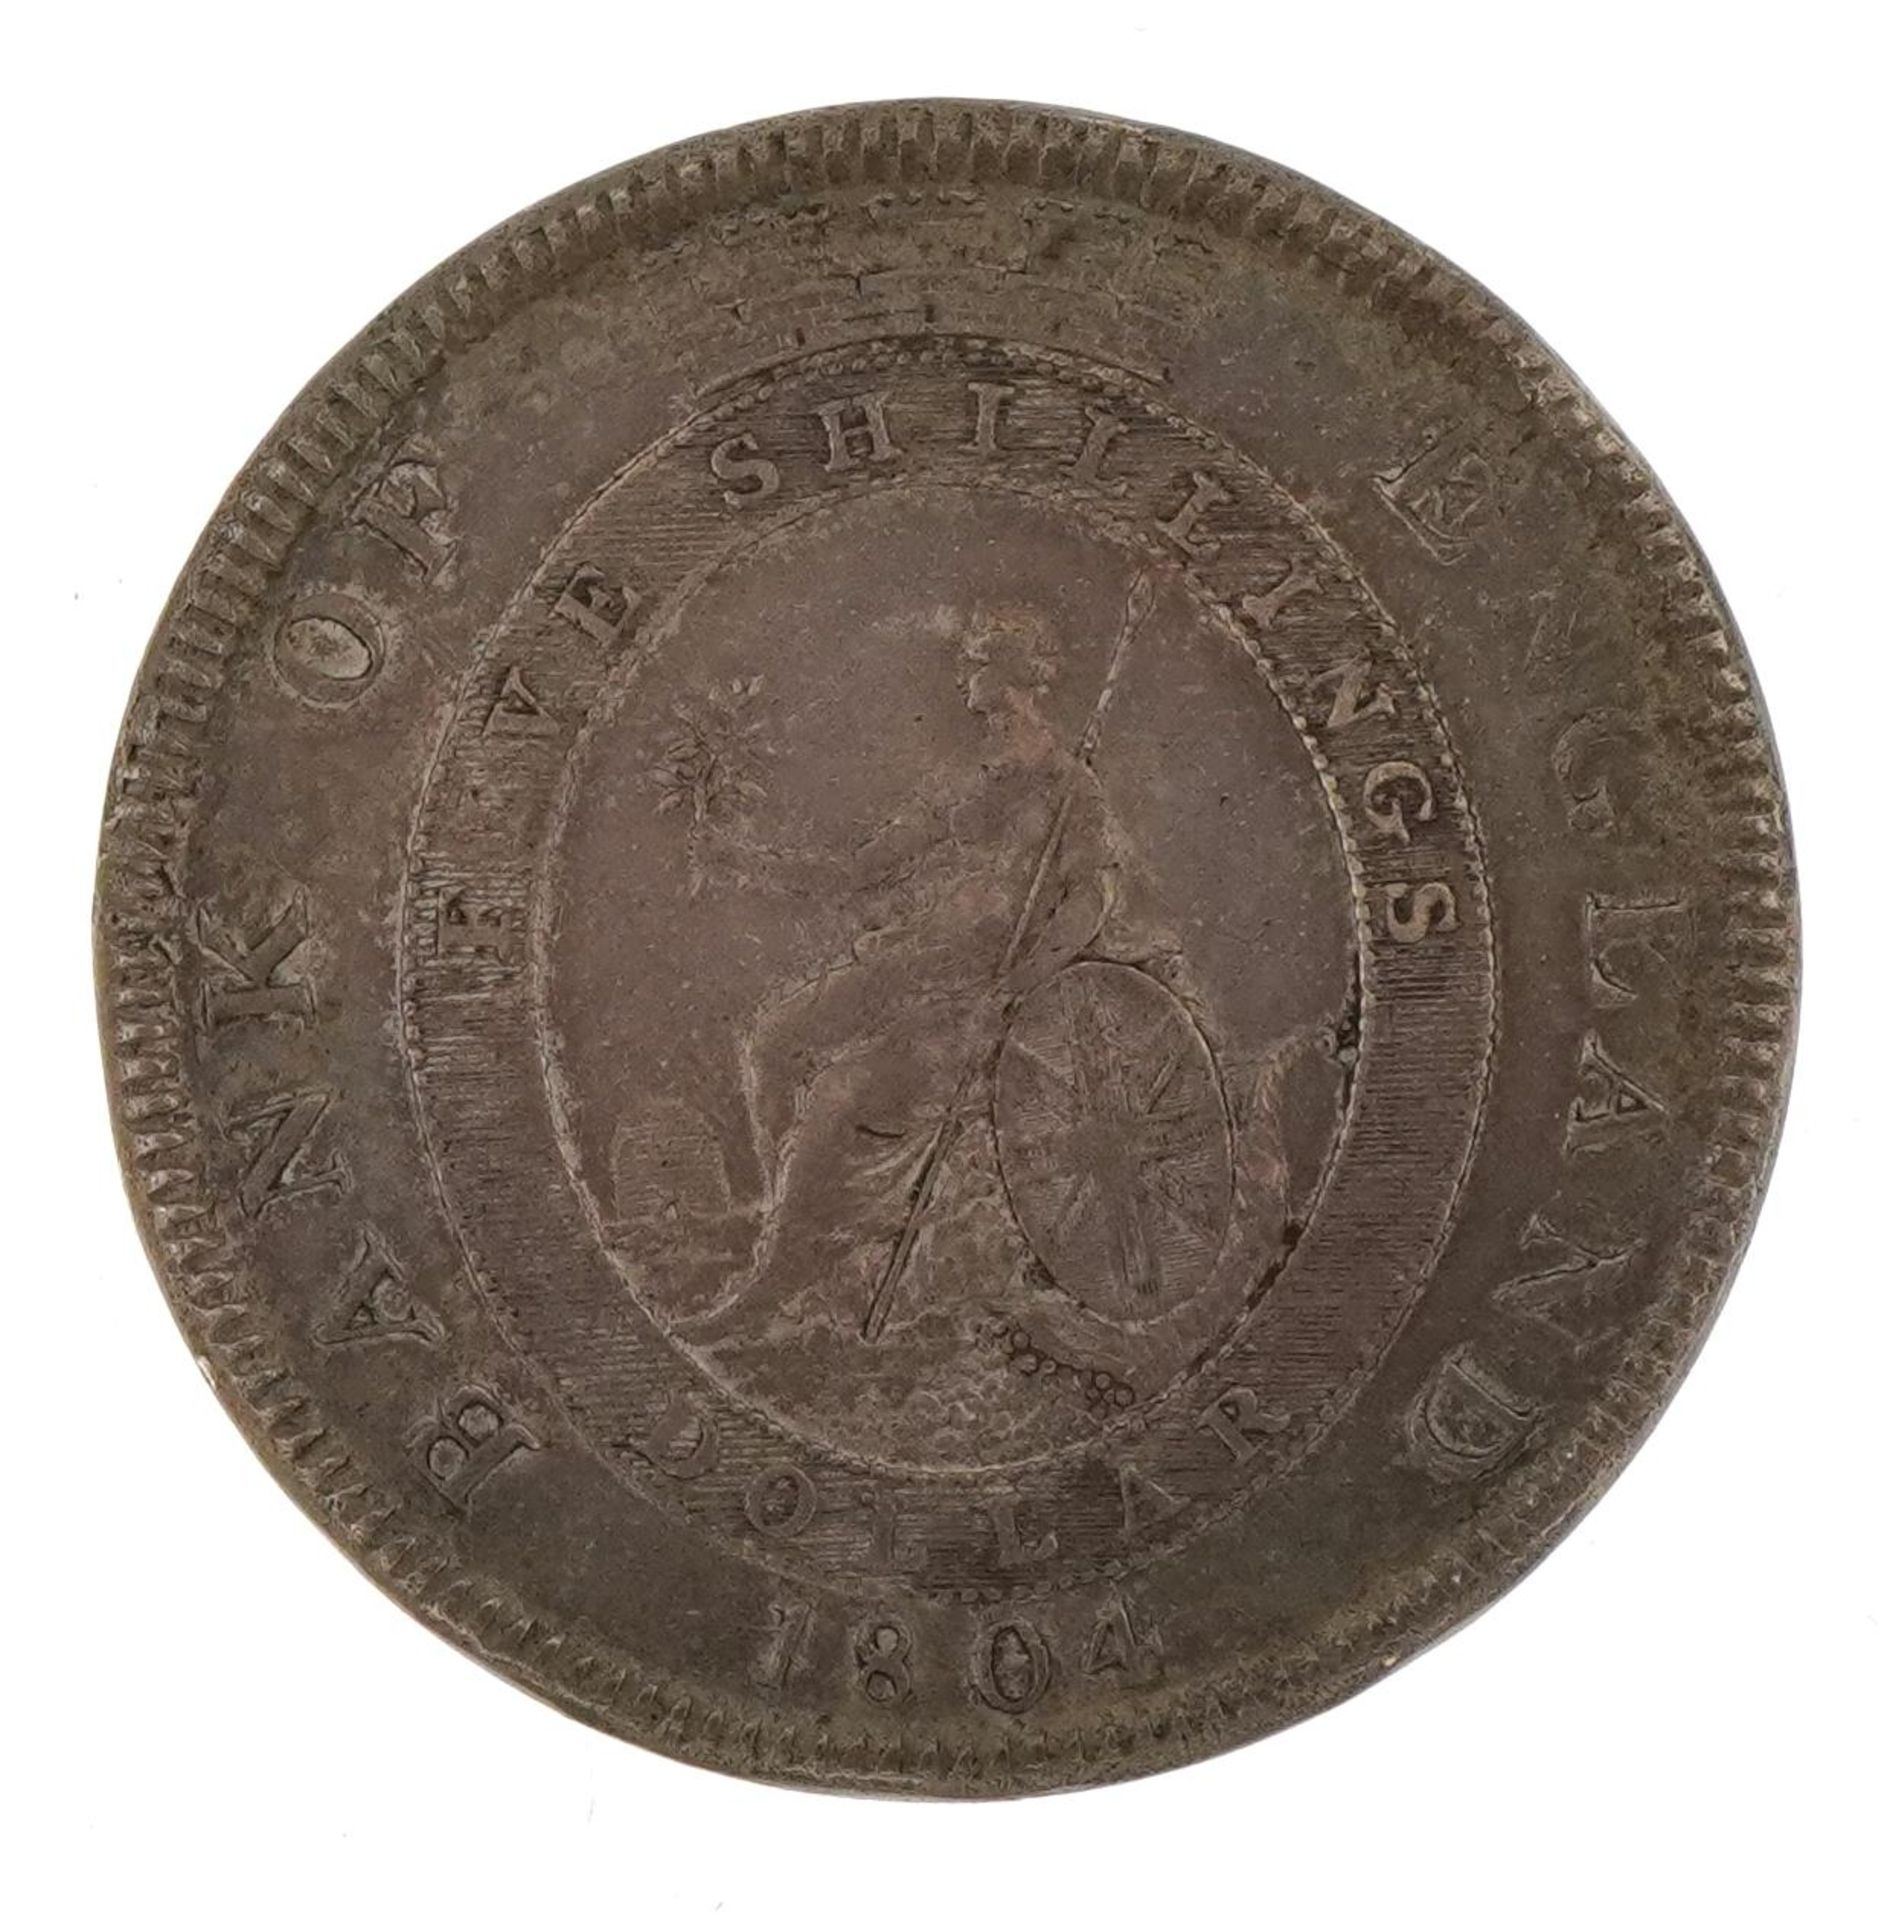 George III 1804 Bank of England five shillings dollar For further information on this lot please